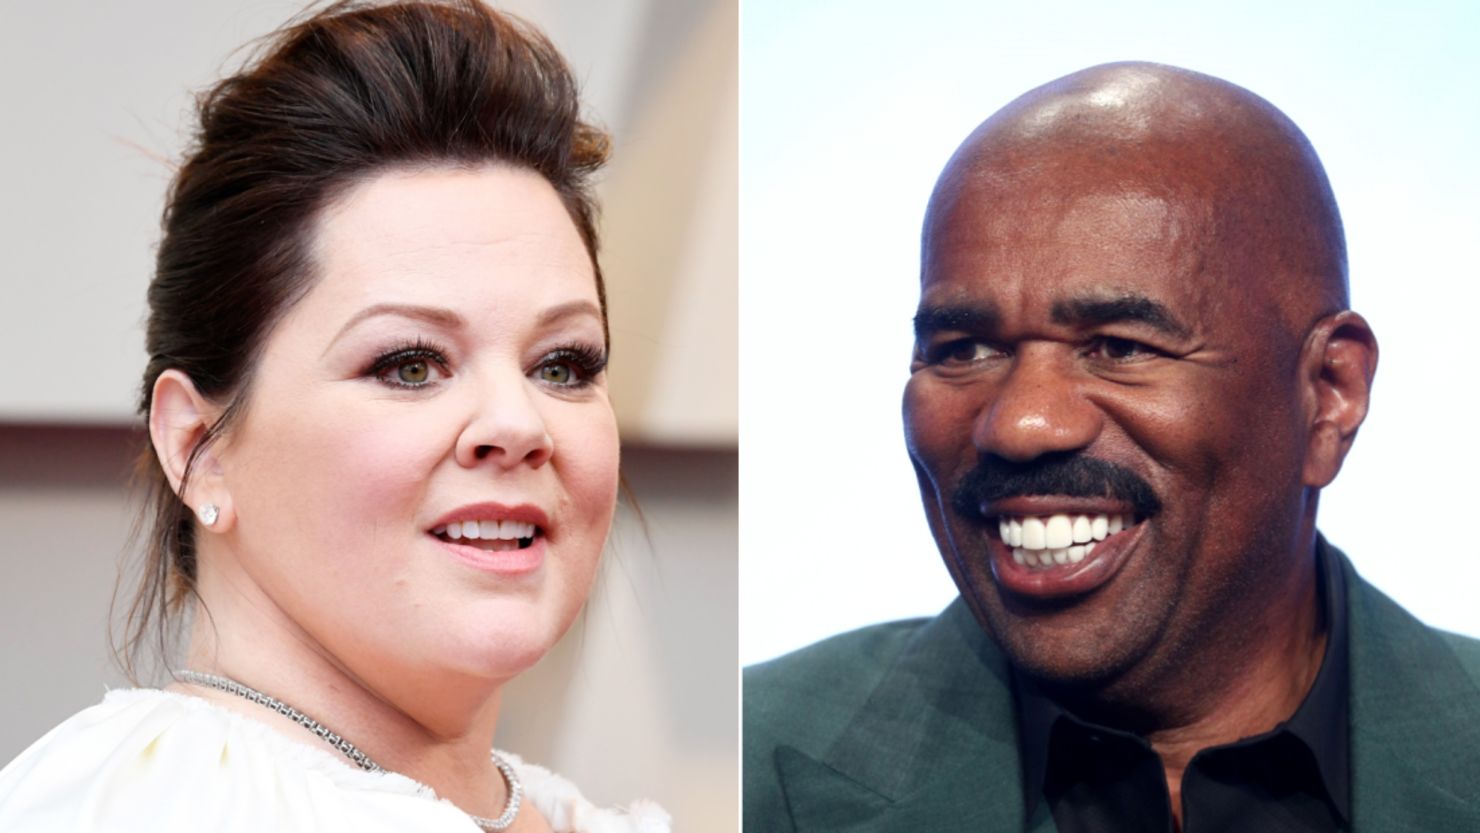 Melissa McCarthy will take over from Steve Harvey as host of NBC's comedy-variety show featuring kids.